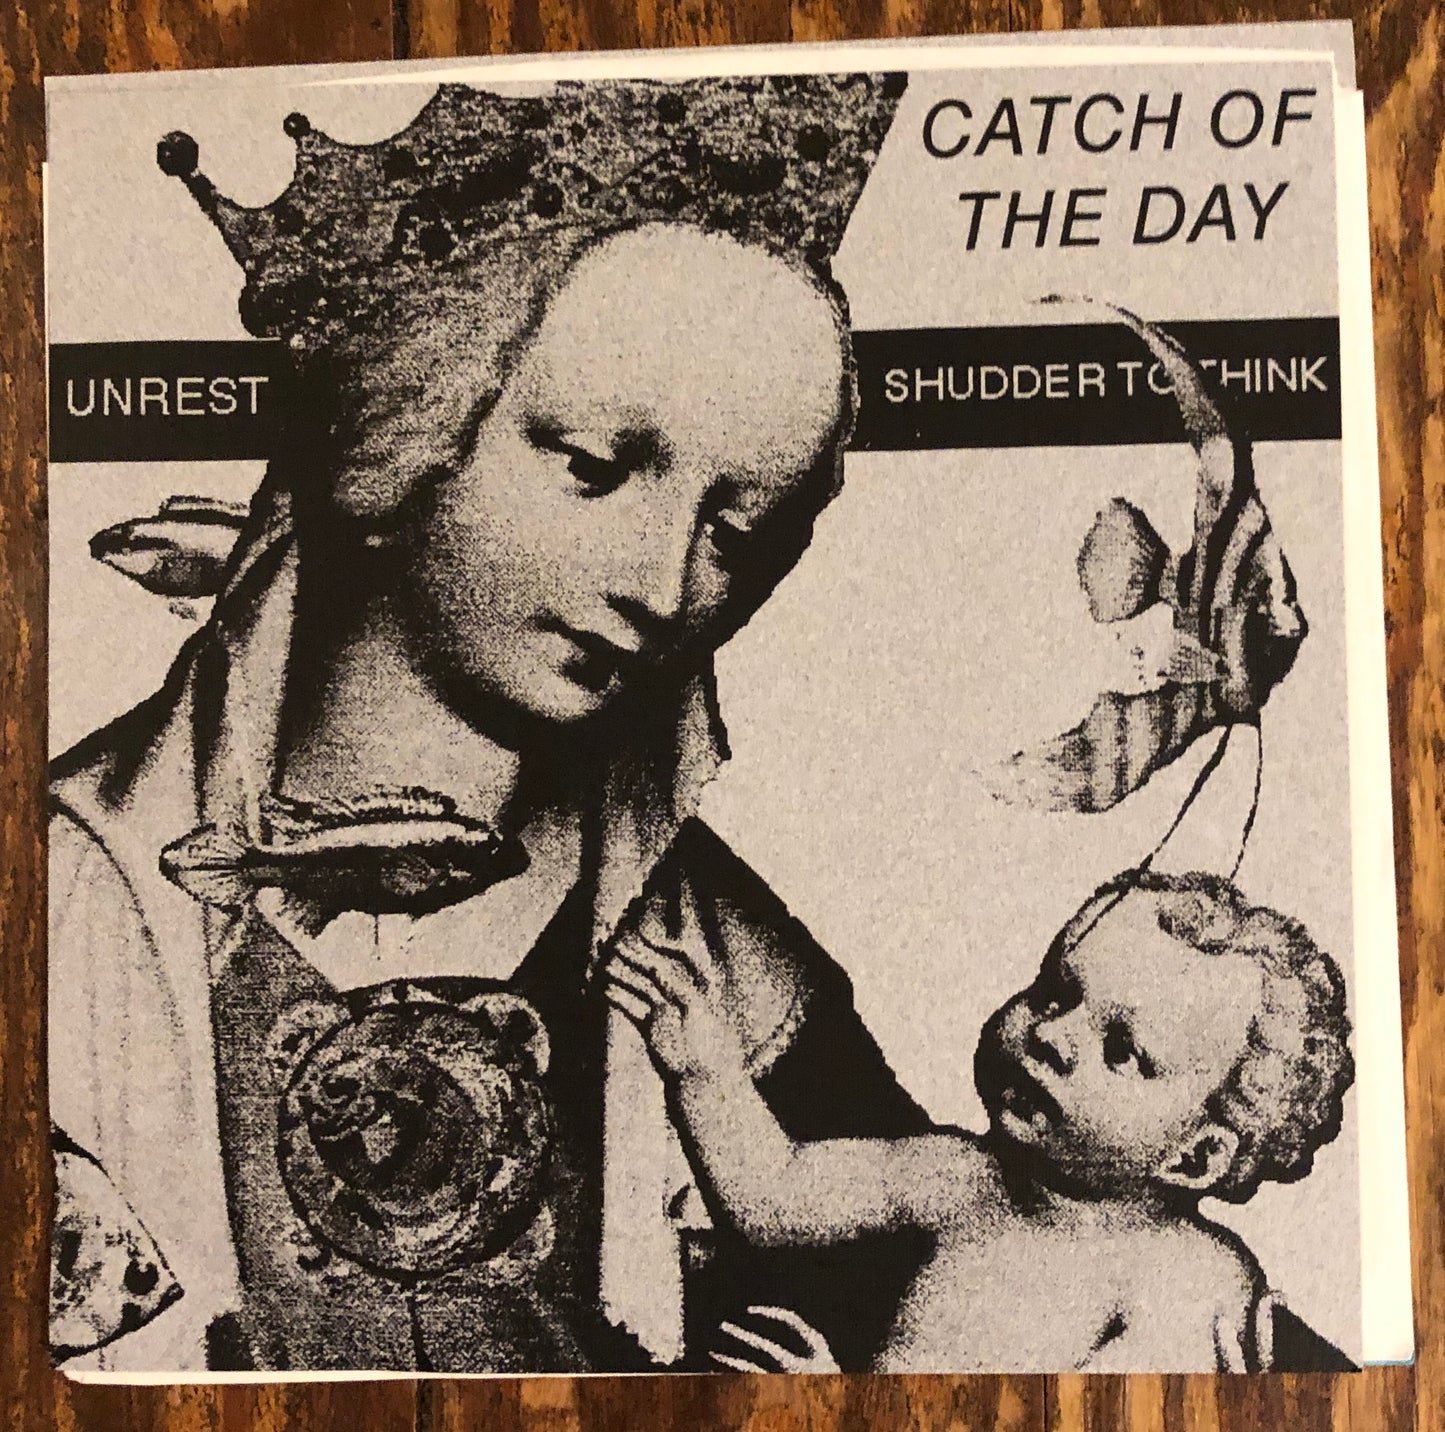 SHUDDER TO THINK / UNREST "Catch of the Day"